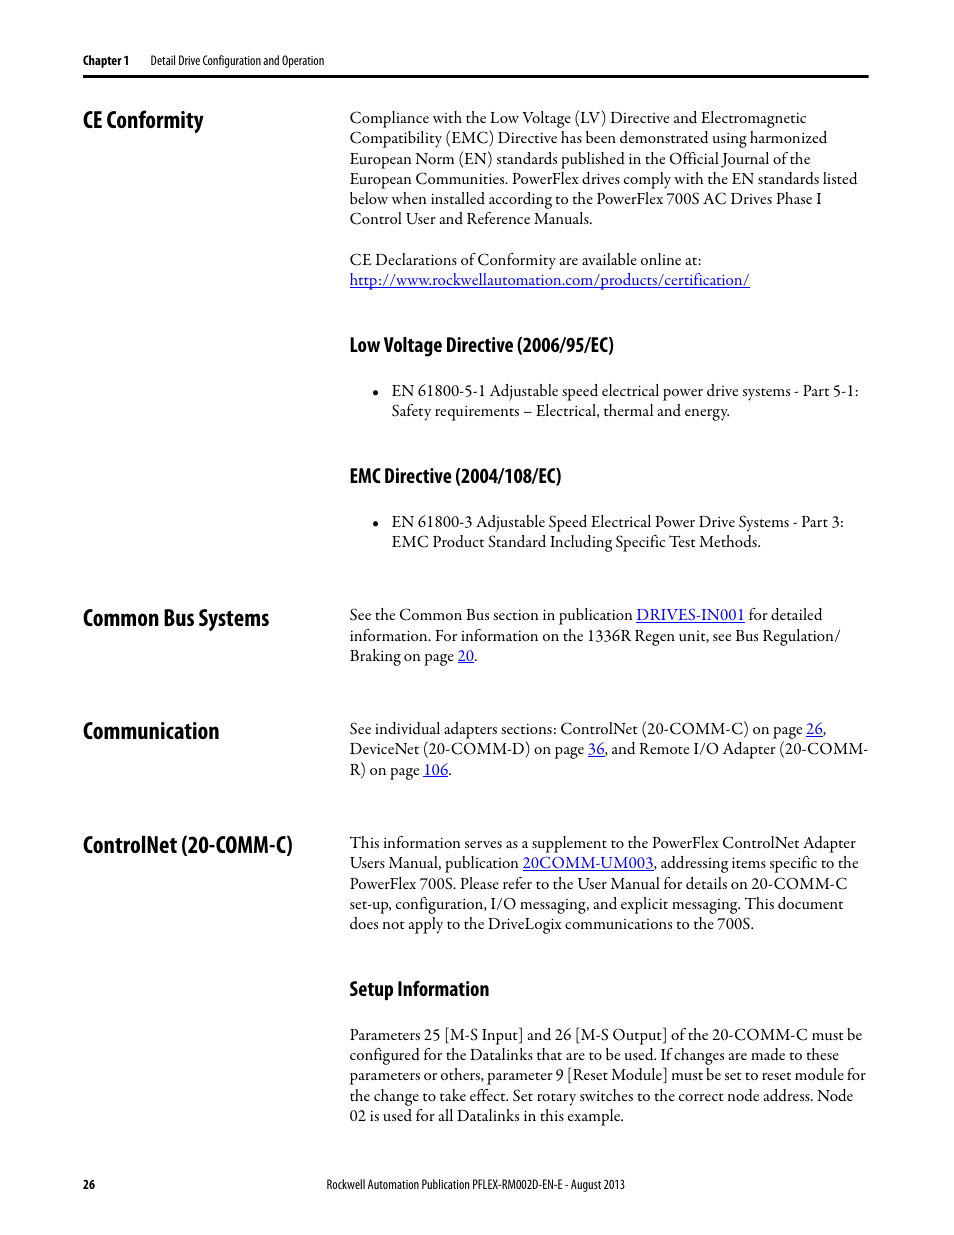 Ce conformity, Low voltage directive (2006/95/ec), Emc directive (2004/108/ec) | Common bus systems, Communication, Controlnet (20-comm-c), Setup information | Rockwell Automation 20D PowerFlex 700S with Phase I Control Reference Manual User Manual | Page 26 / 190